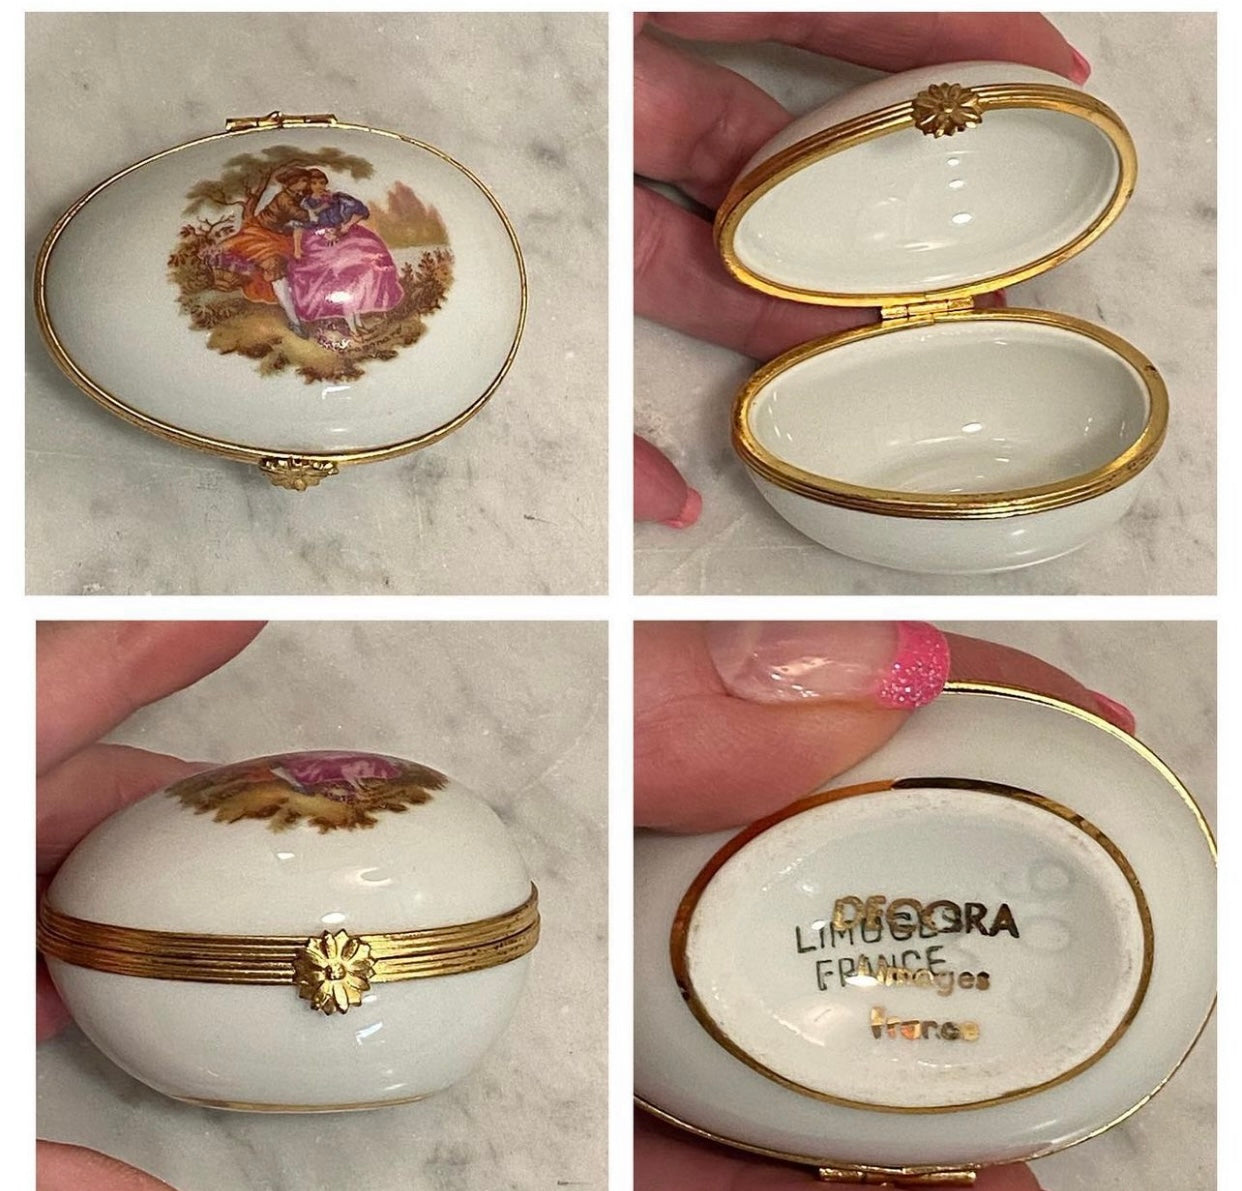 EUC Limoges Small Hinged Egg Trinket Box Lovers on Lid Horizontal Floral Clasp